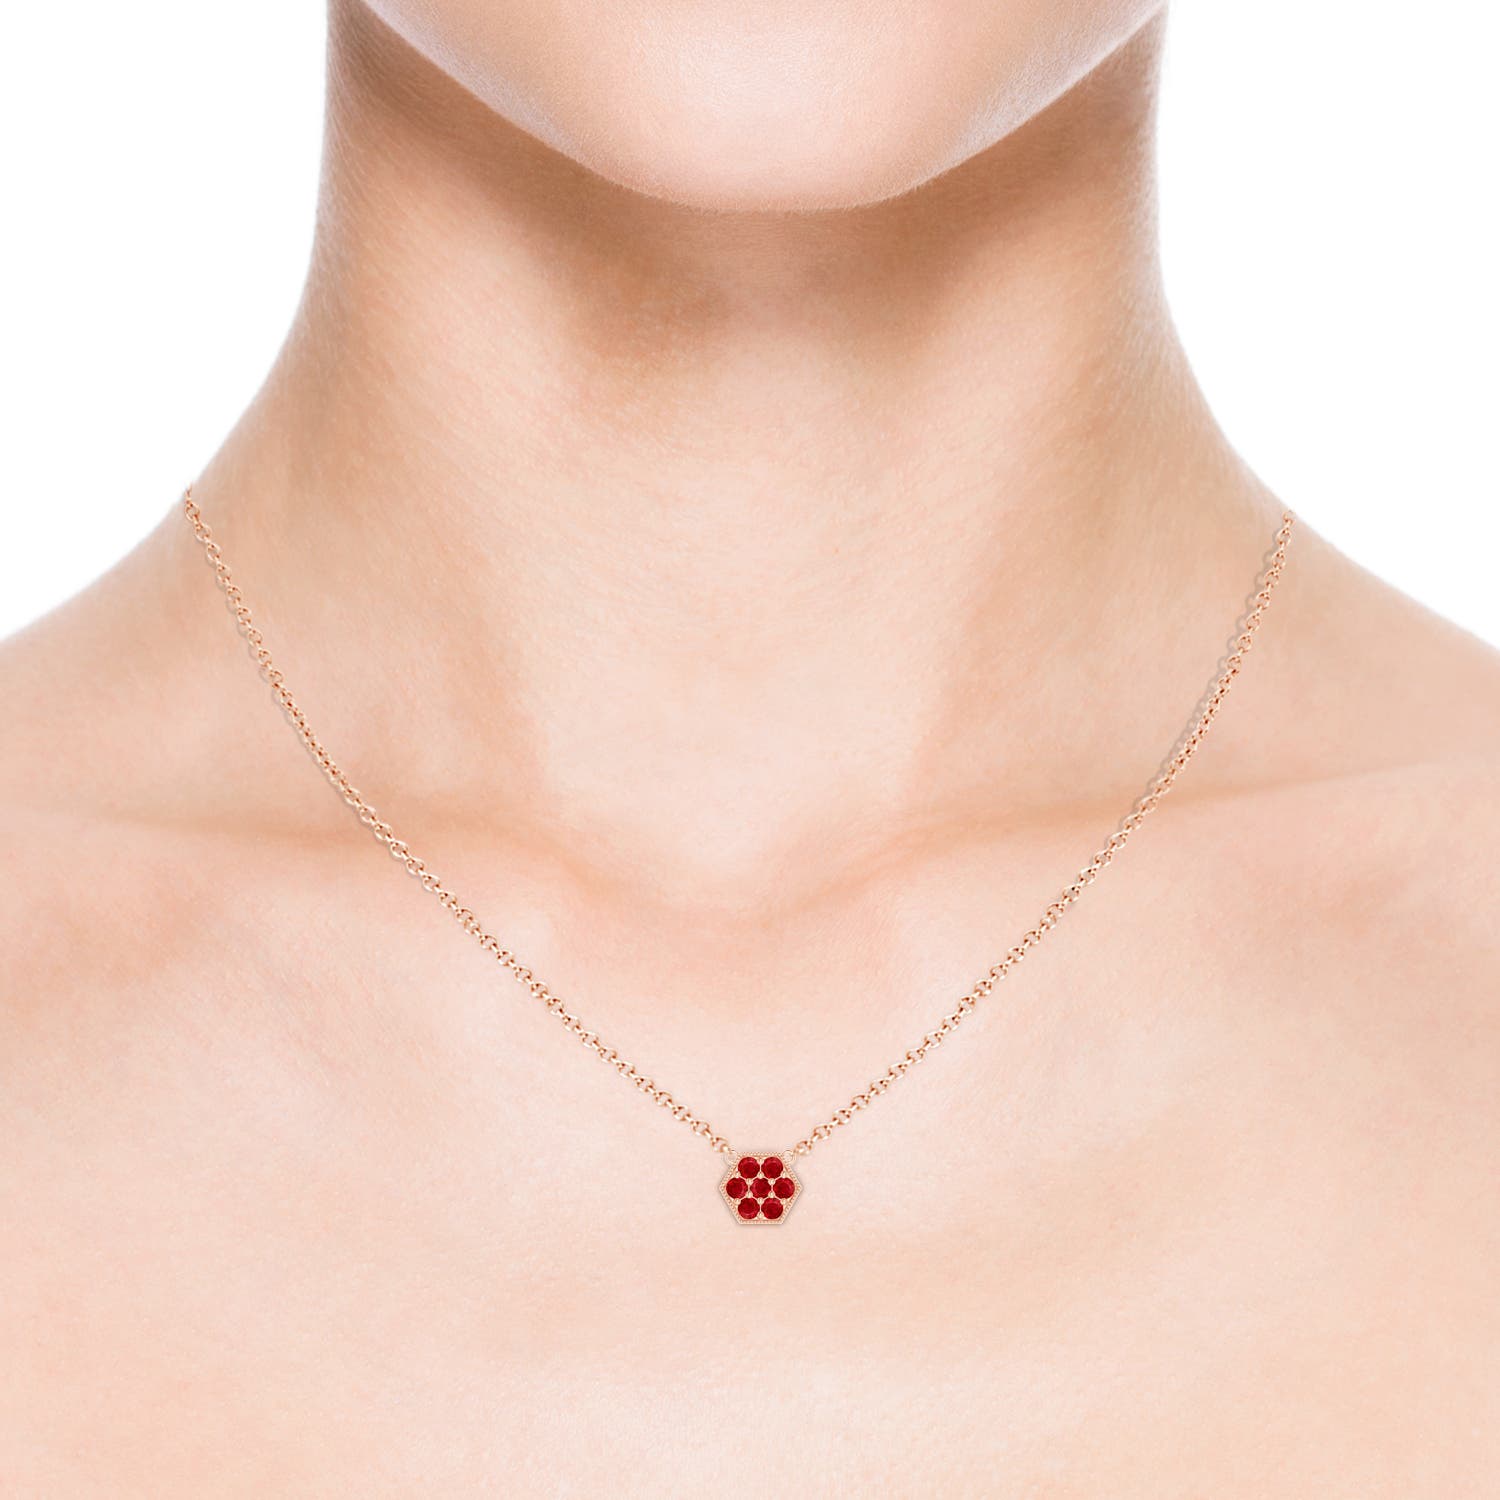 AAA - Ruby / 0.35 CT / 14 KT Rose Gold